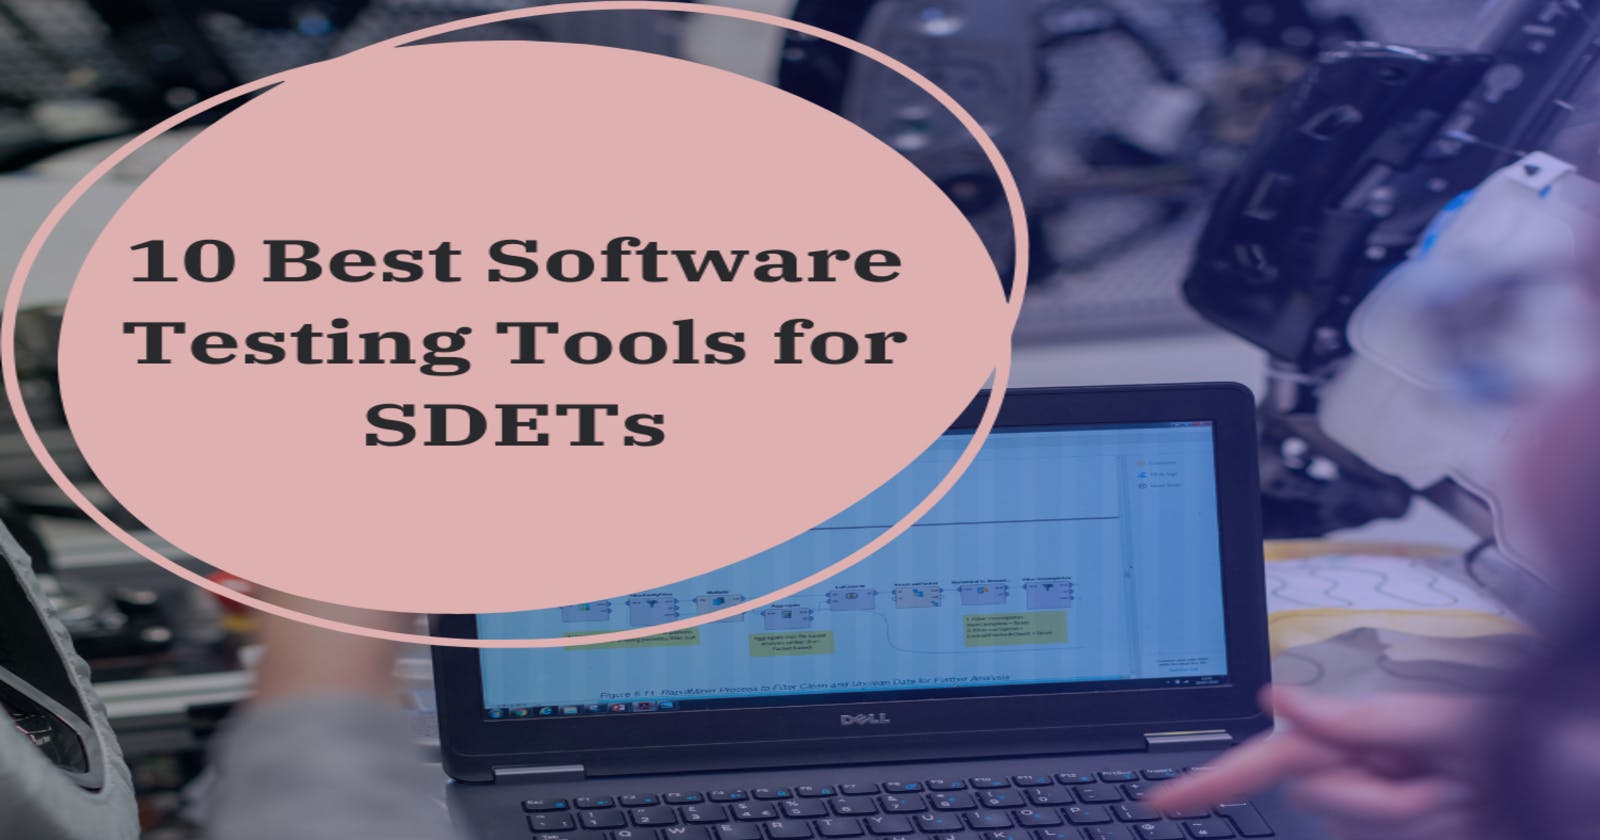 10 Best Software Testing Tools for SDETs